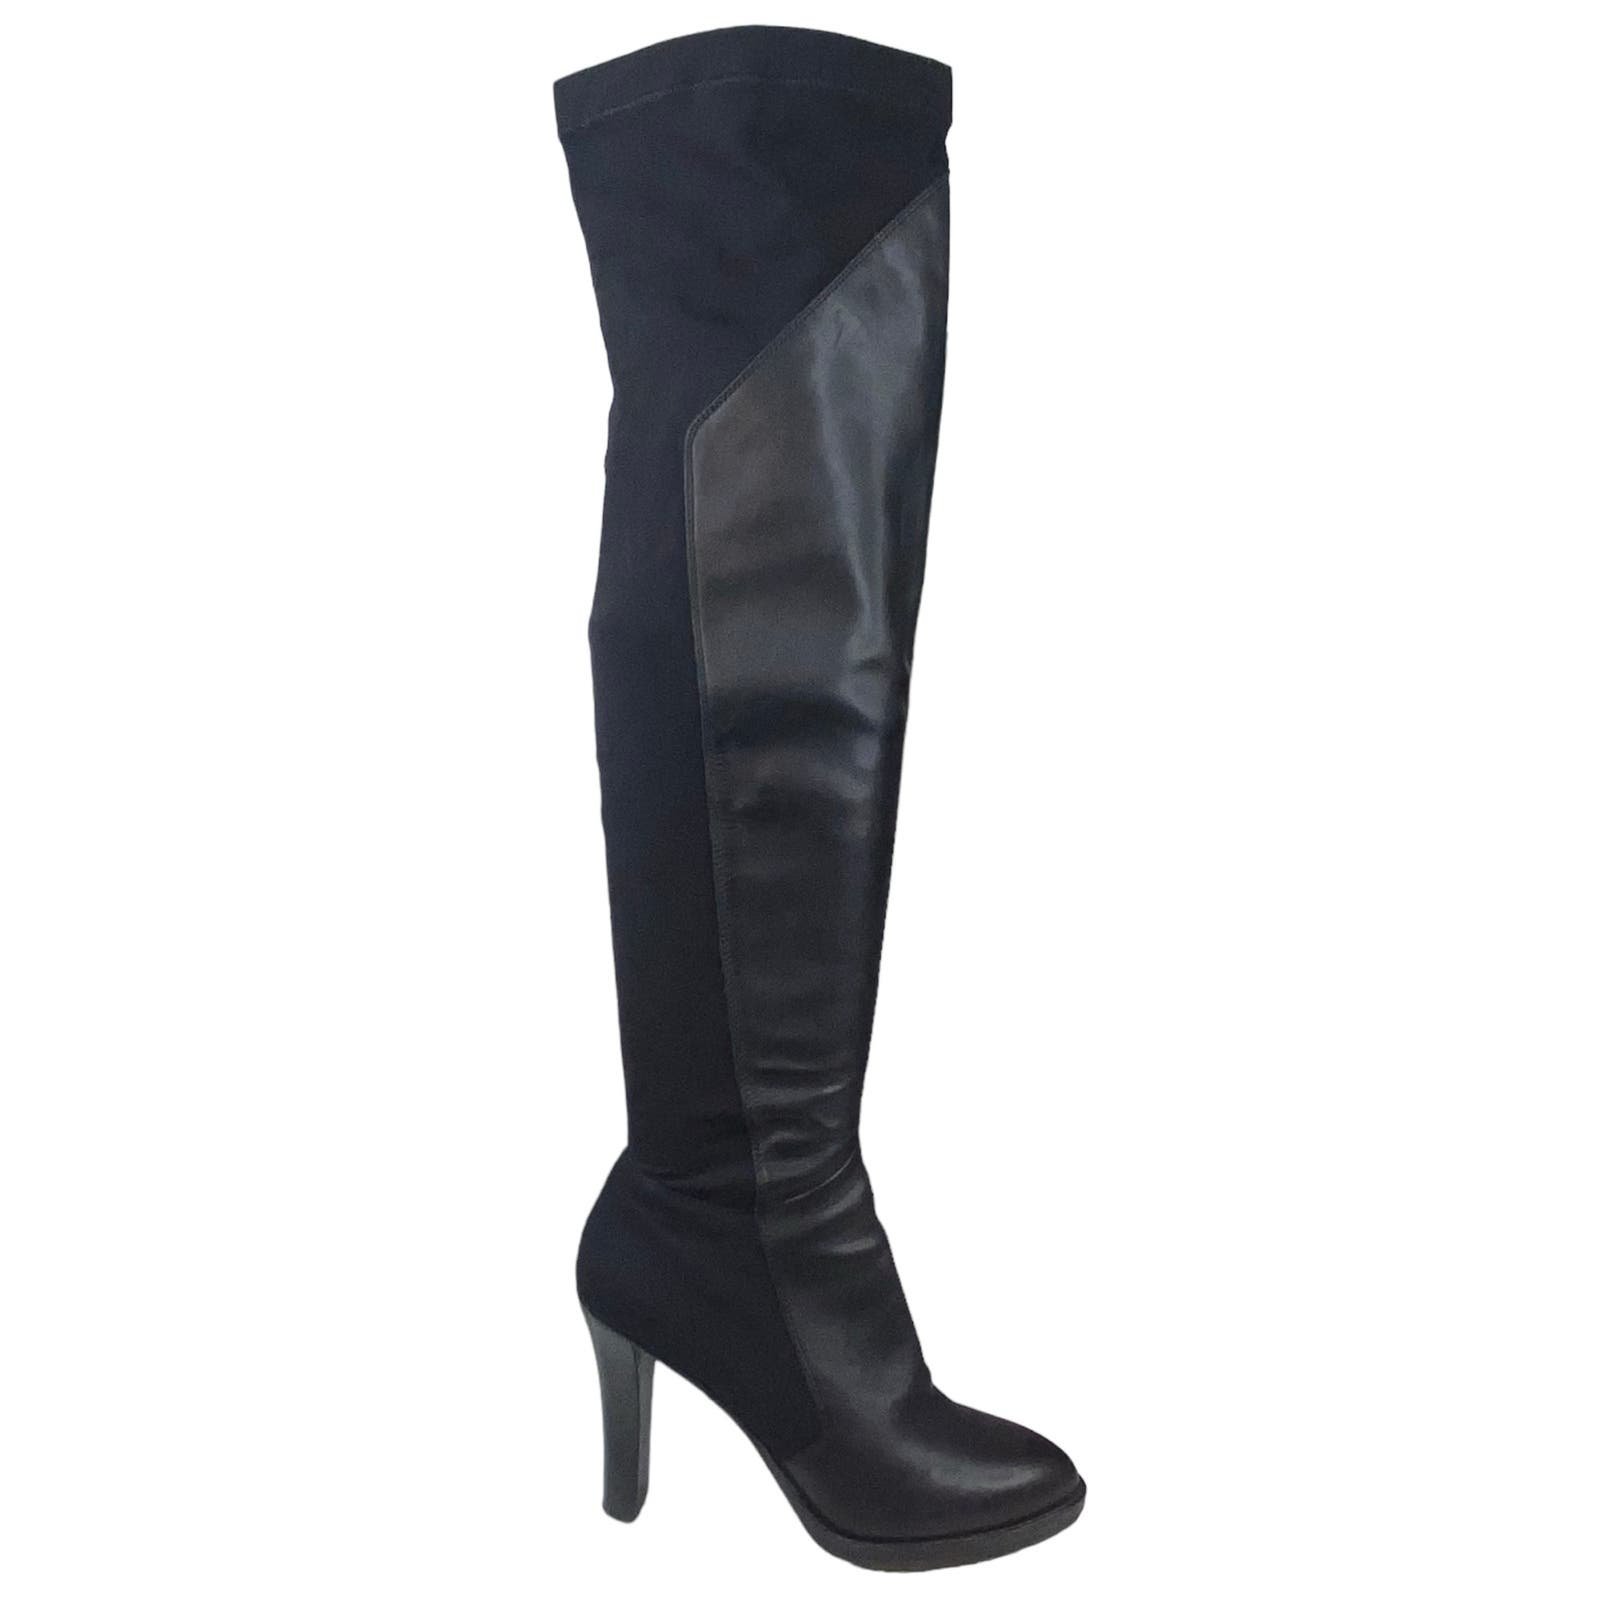 DKNY Women’s Prue Black Two Tone Over the Knee Boot Siz